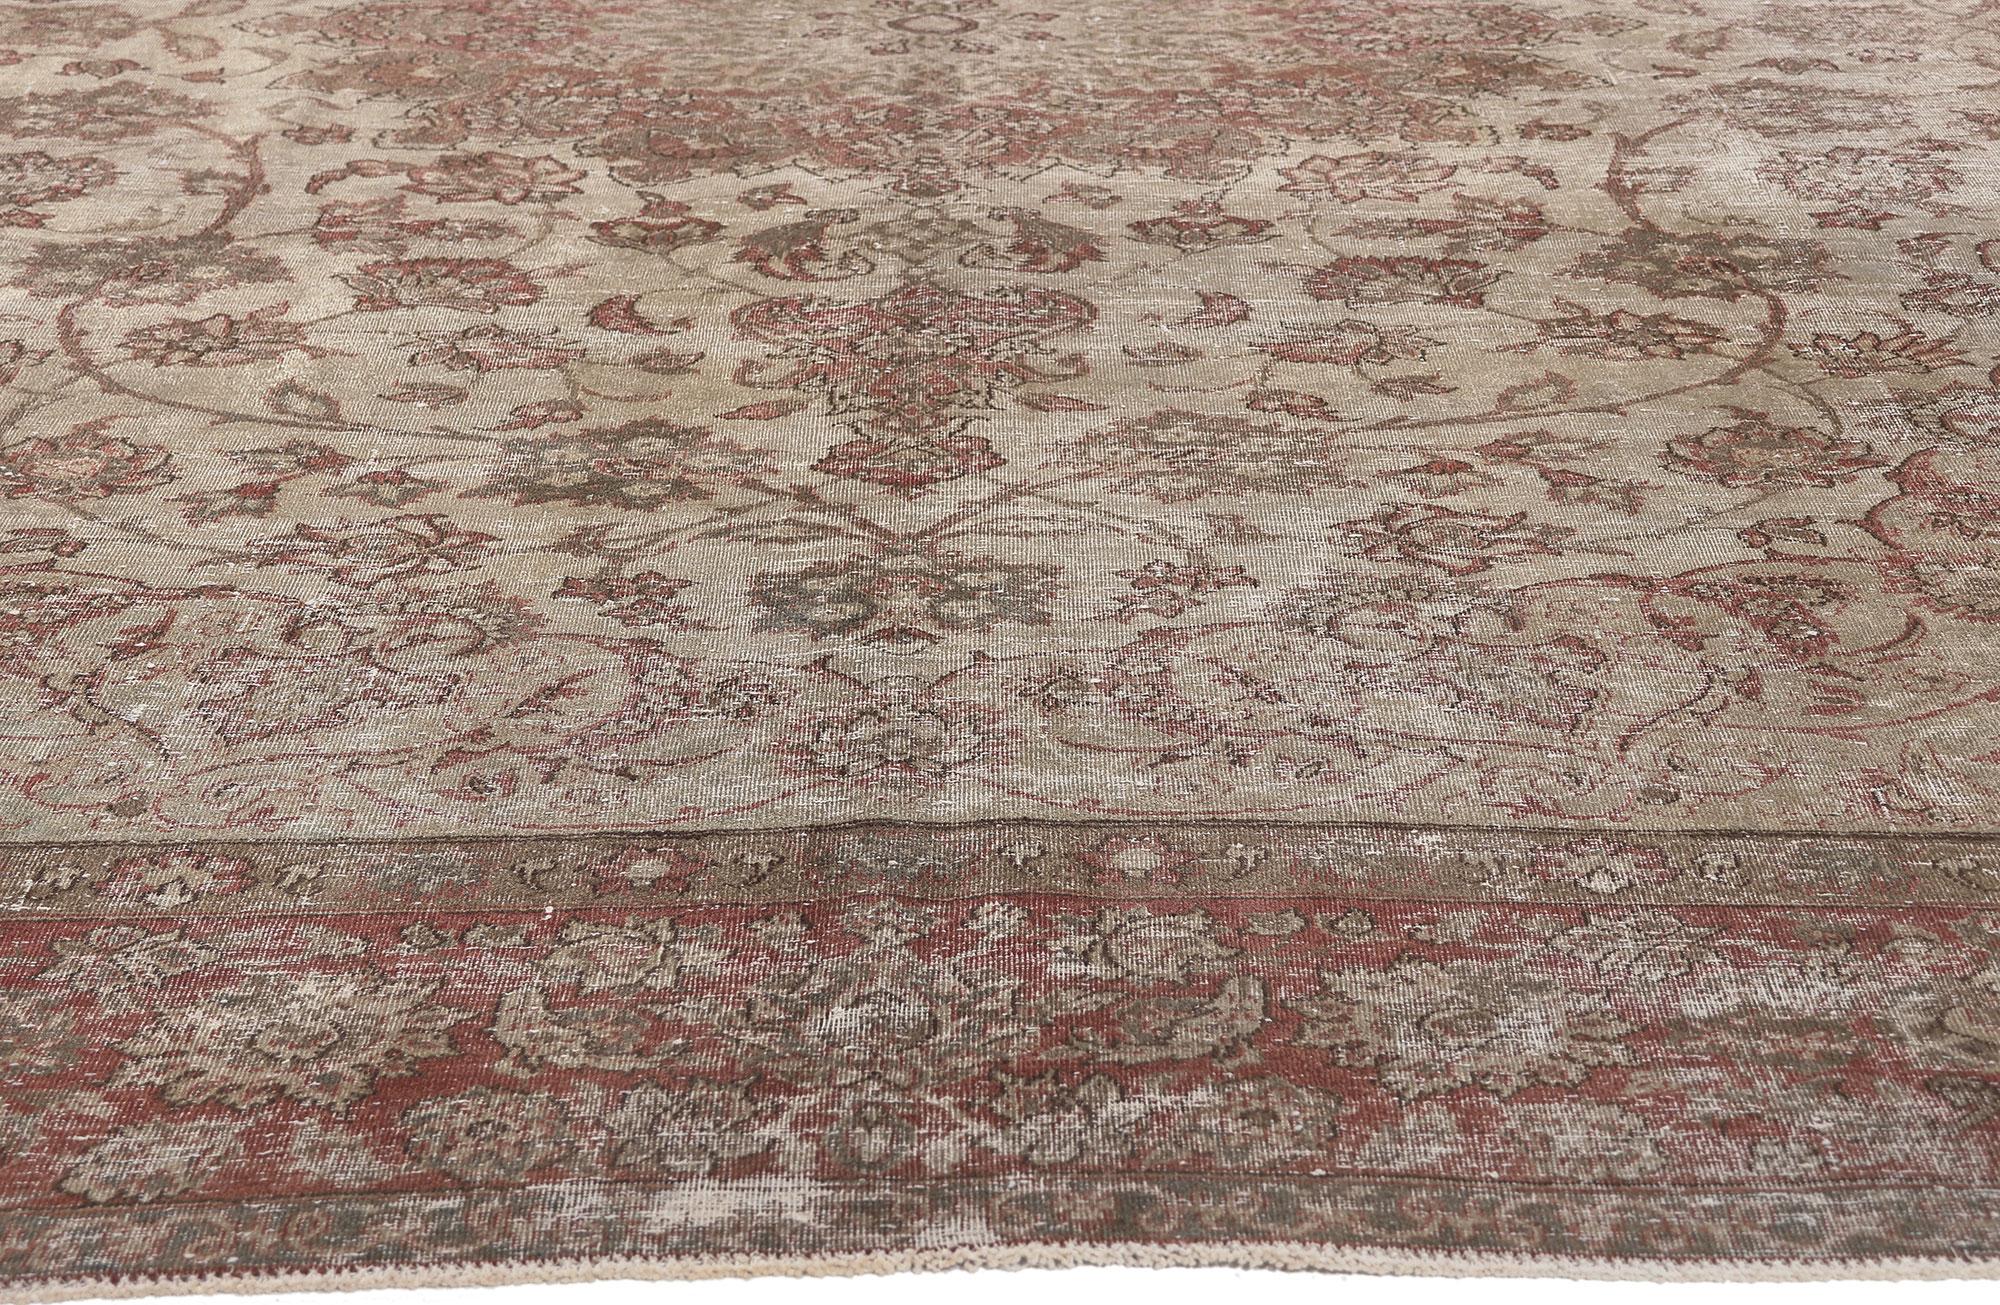 Rustic Distressed Vintage Persian Tabriz Rug with Faded Earth-Tone Colors For Sale